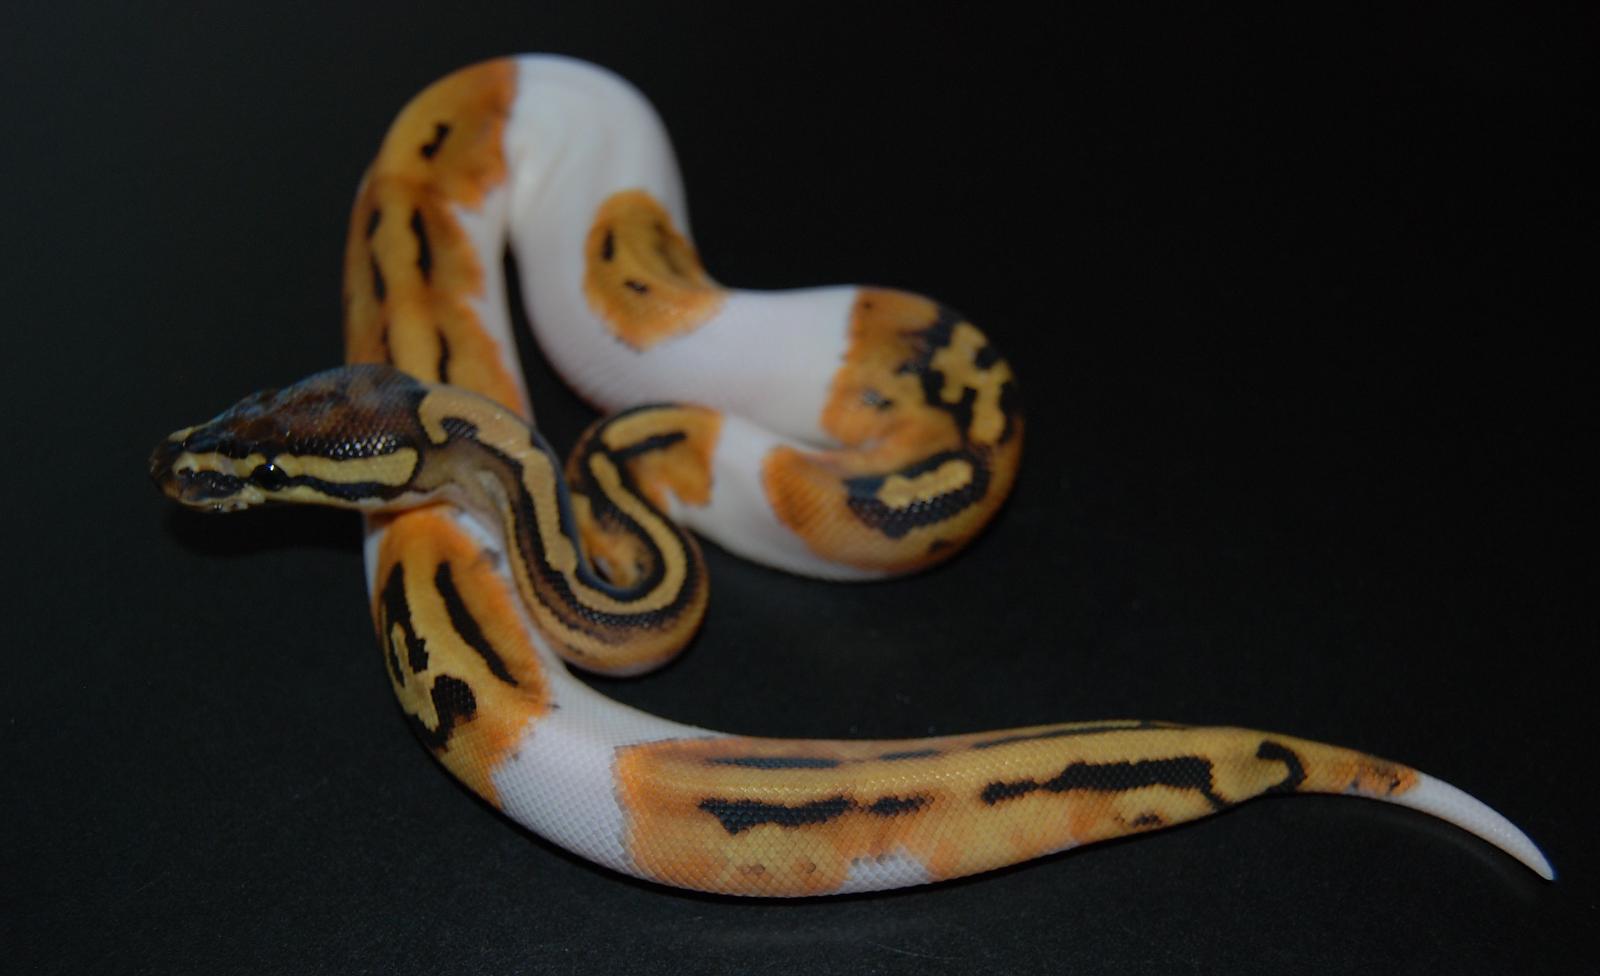 Soma, my new Pied male